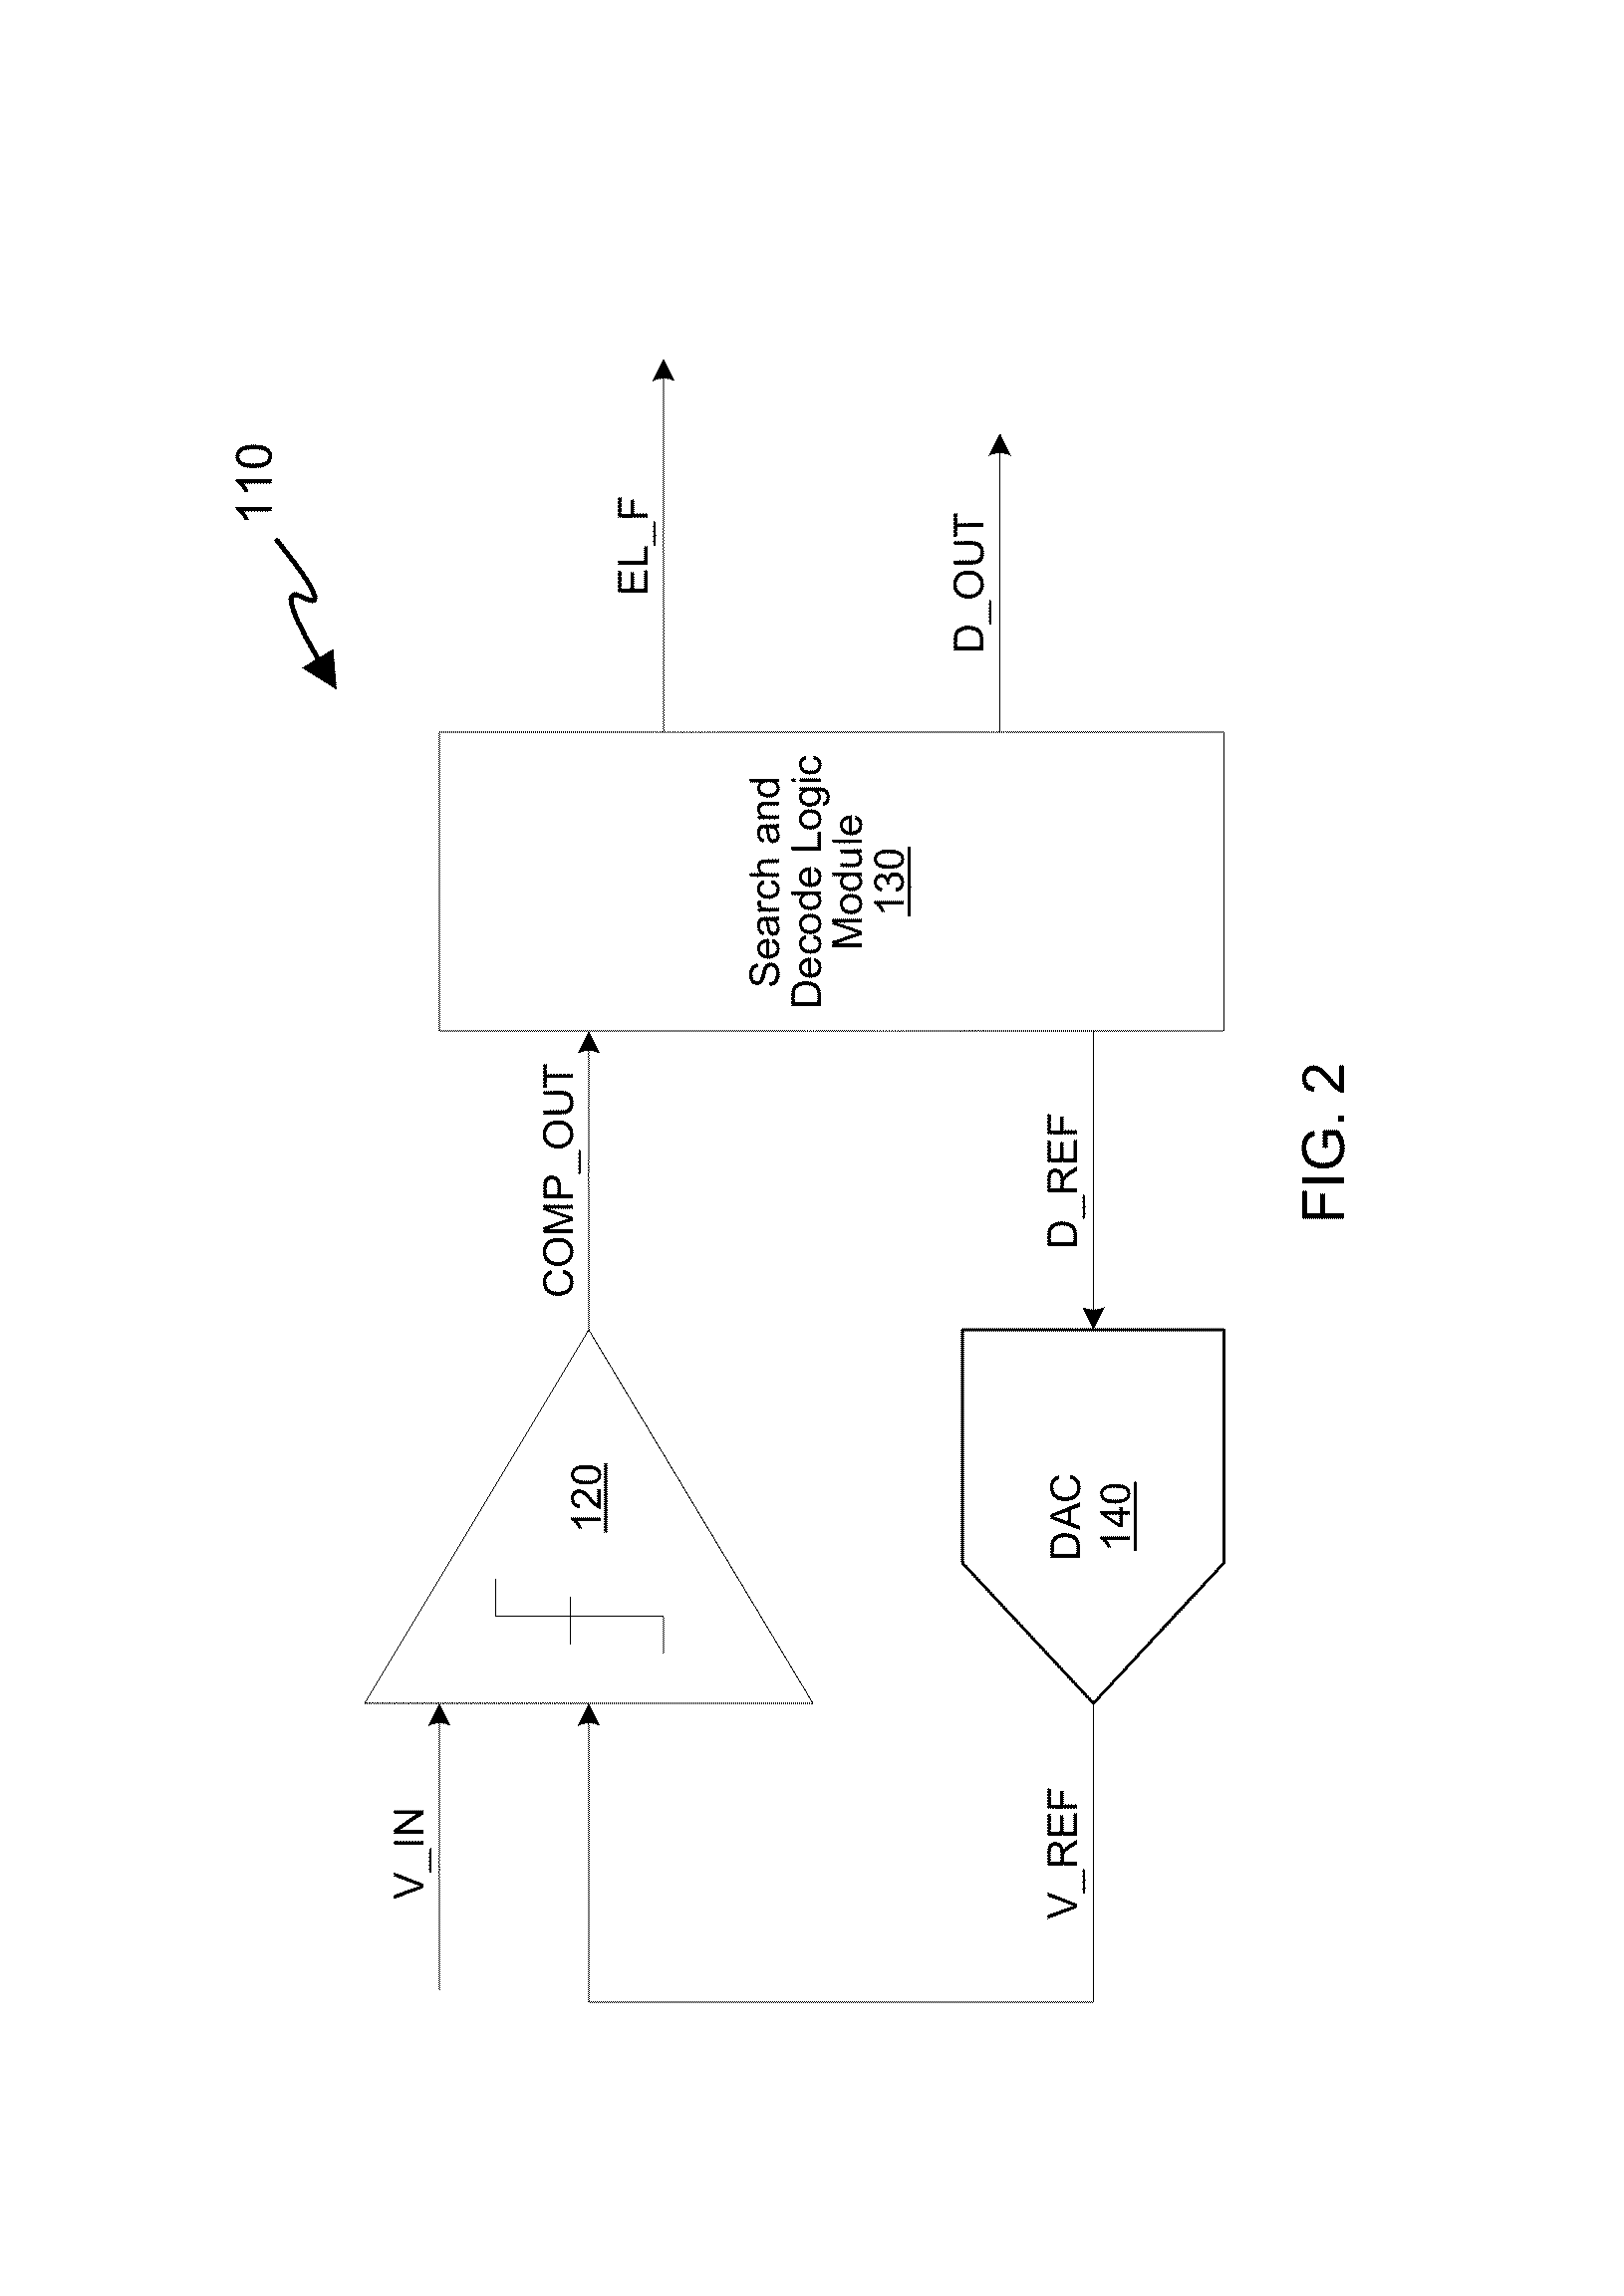 Successive approximation analog-to-digital converter (ADC) with dynamic search algorithm